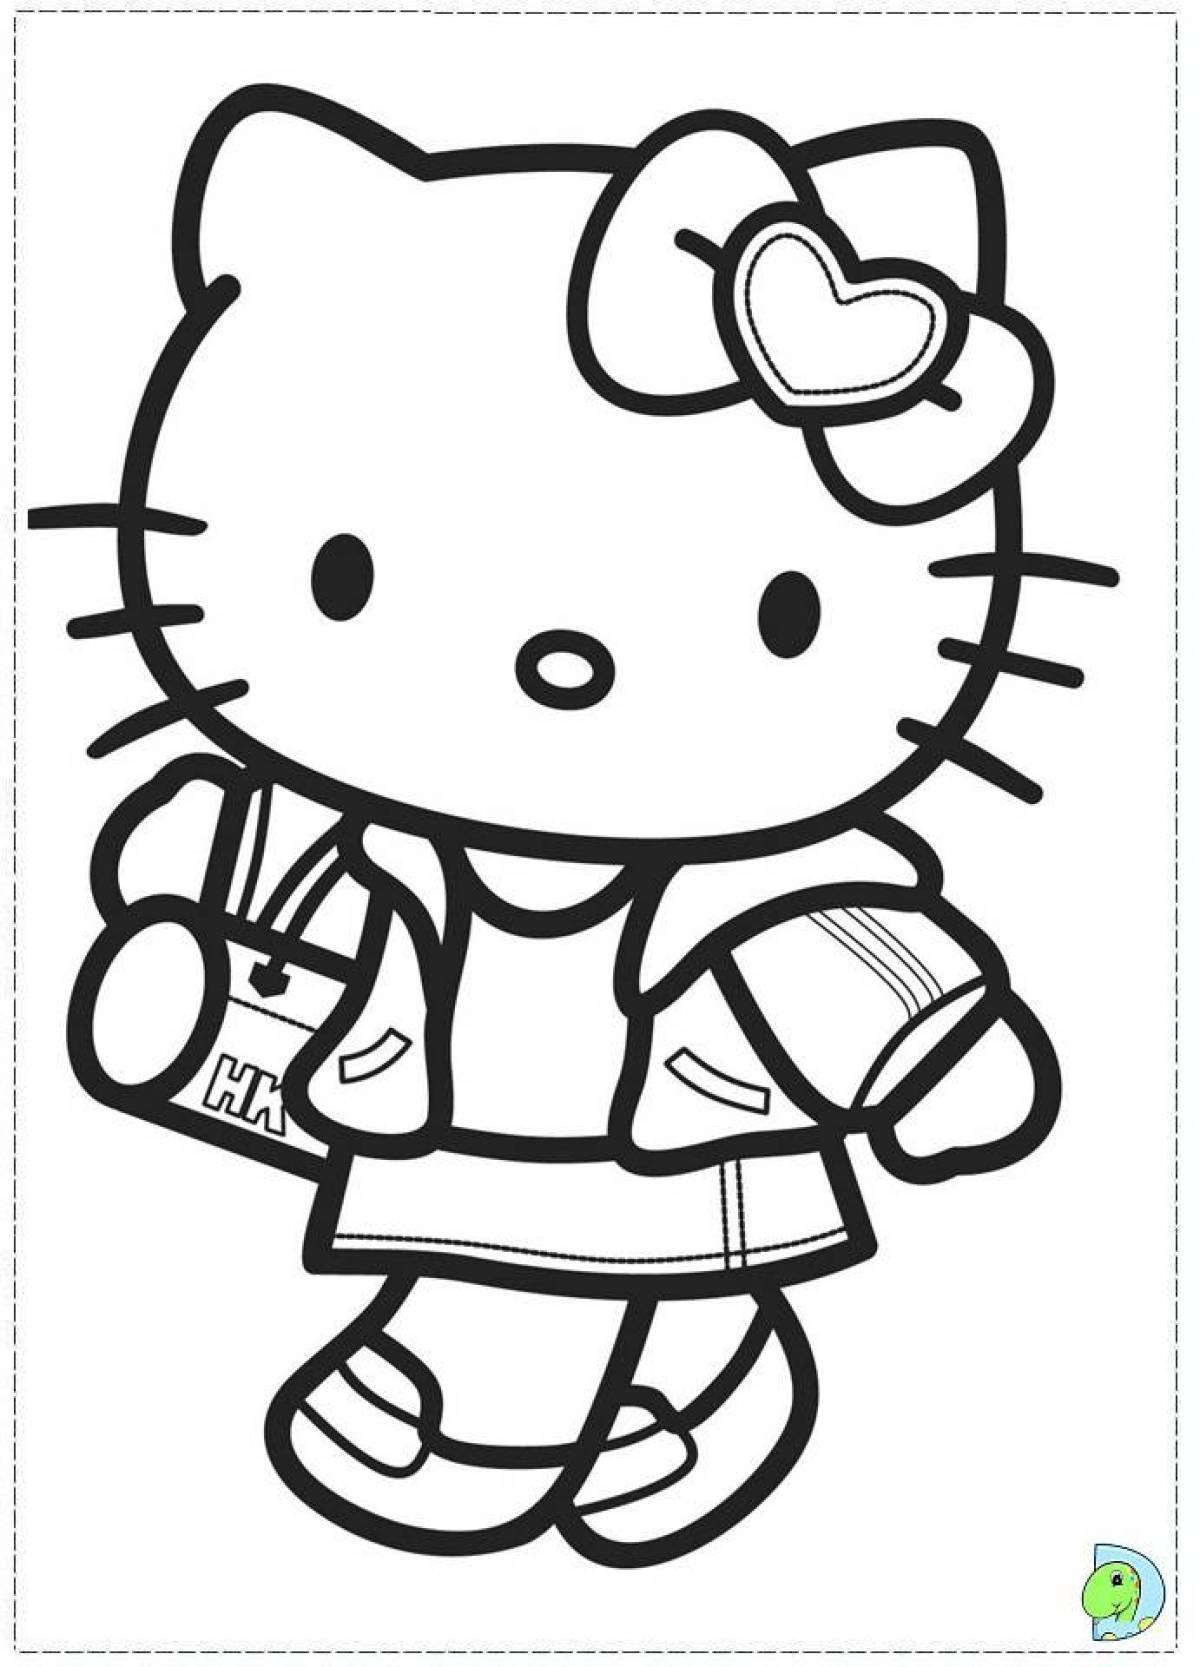 Amazing kuromi and hello kitty coloring page